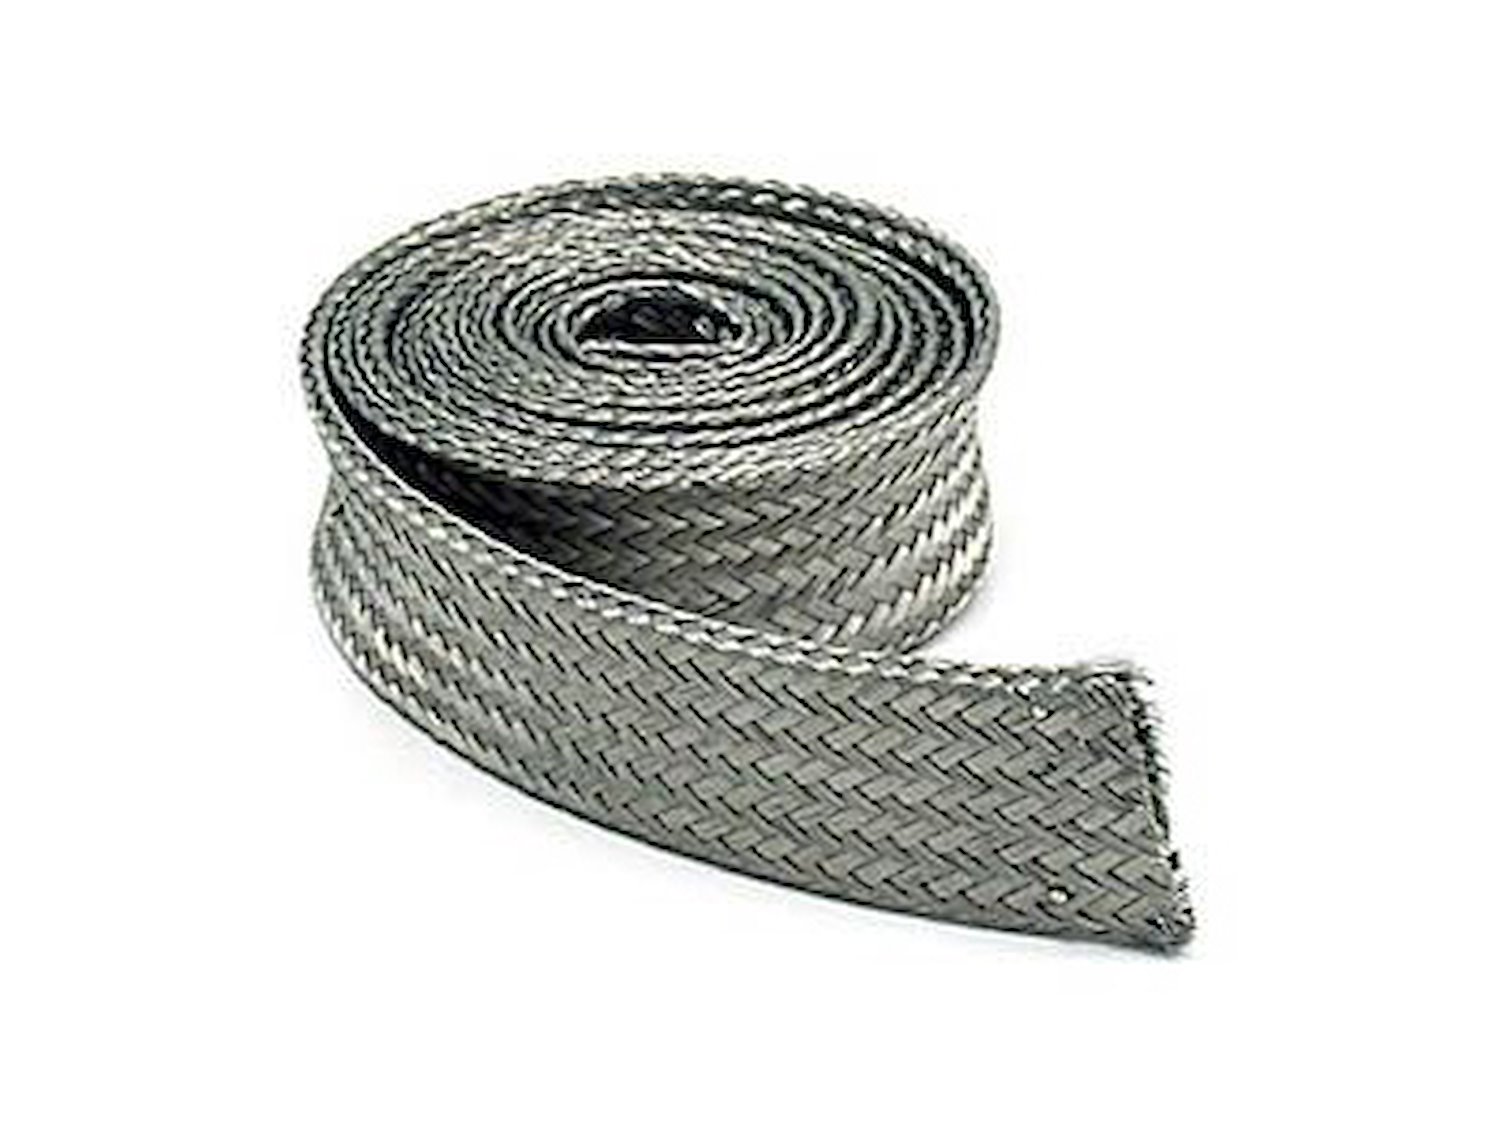 Stainless Steel Hose 6 Foot Roll